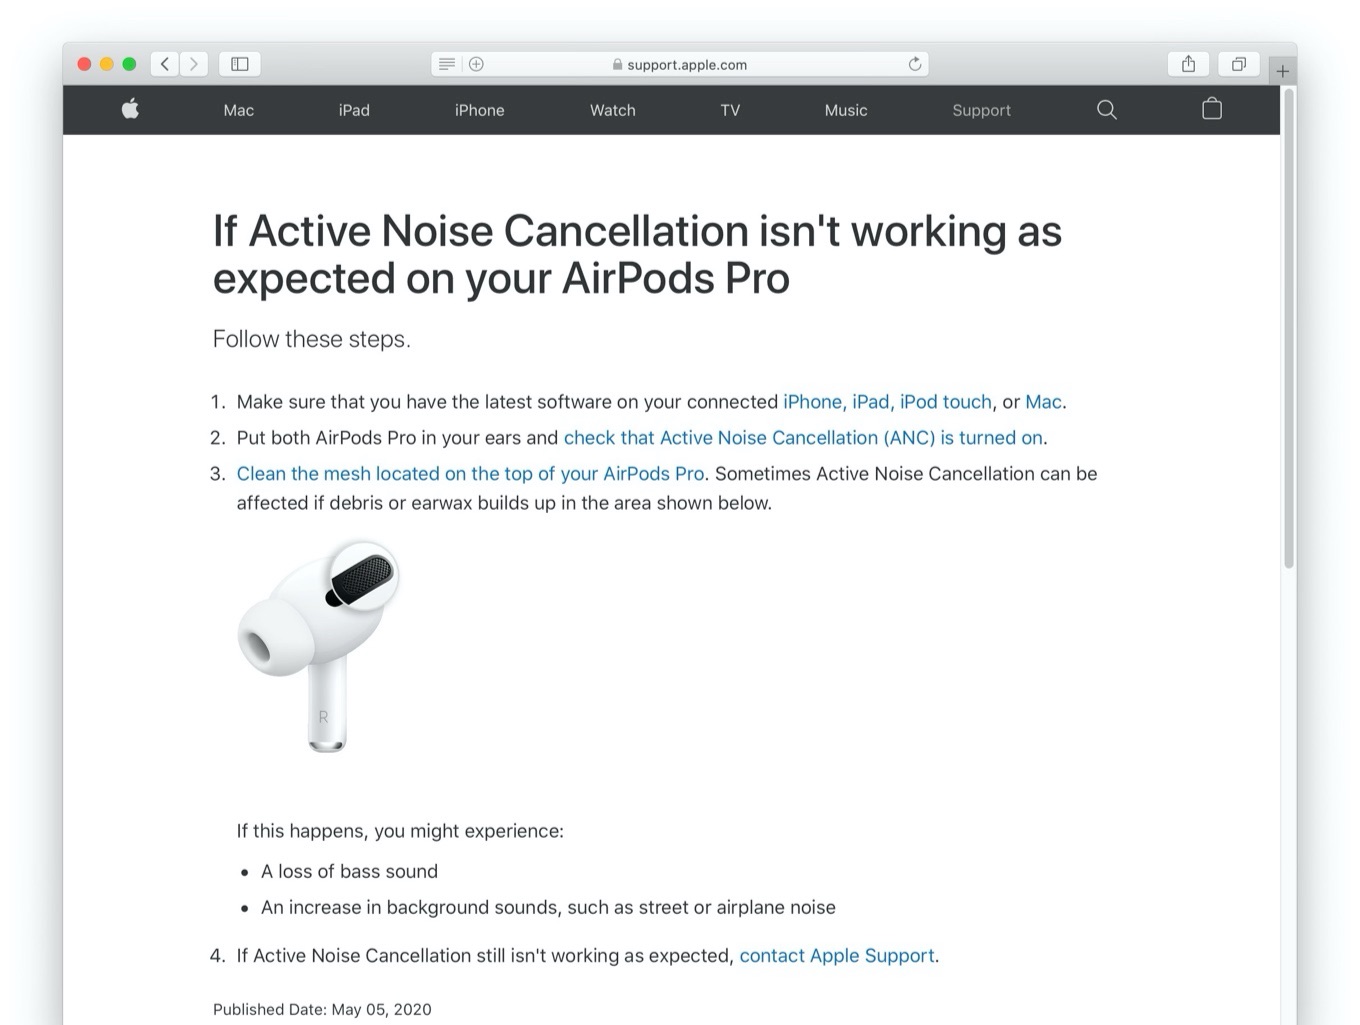 AirPods Pro Active Noise Cancellation issues